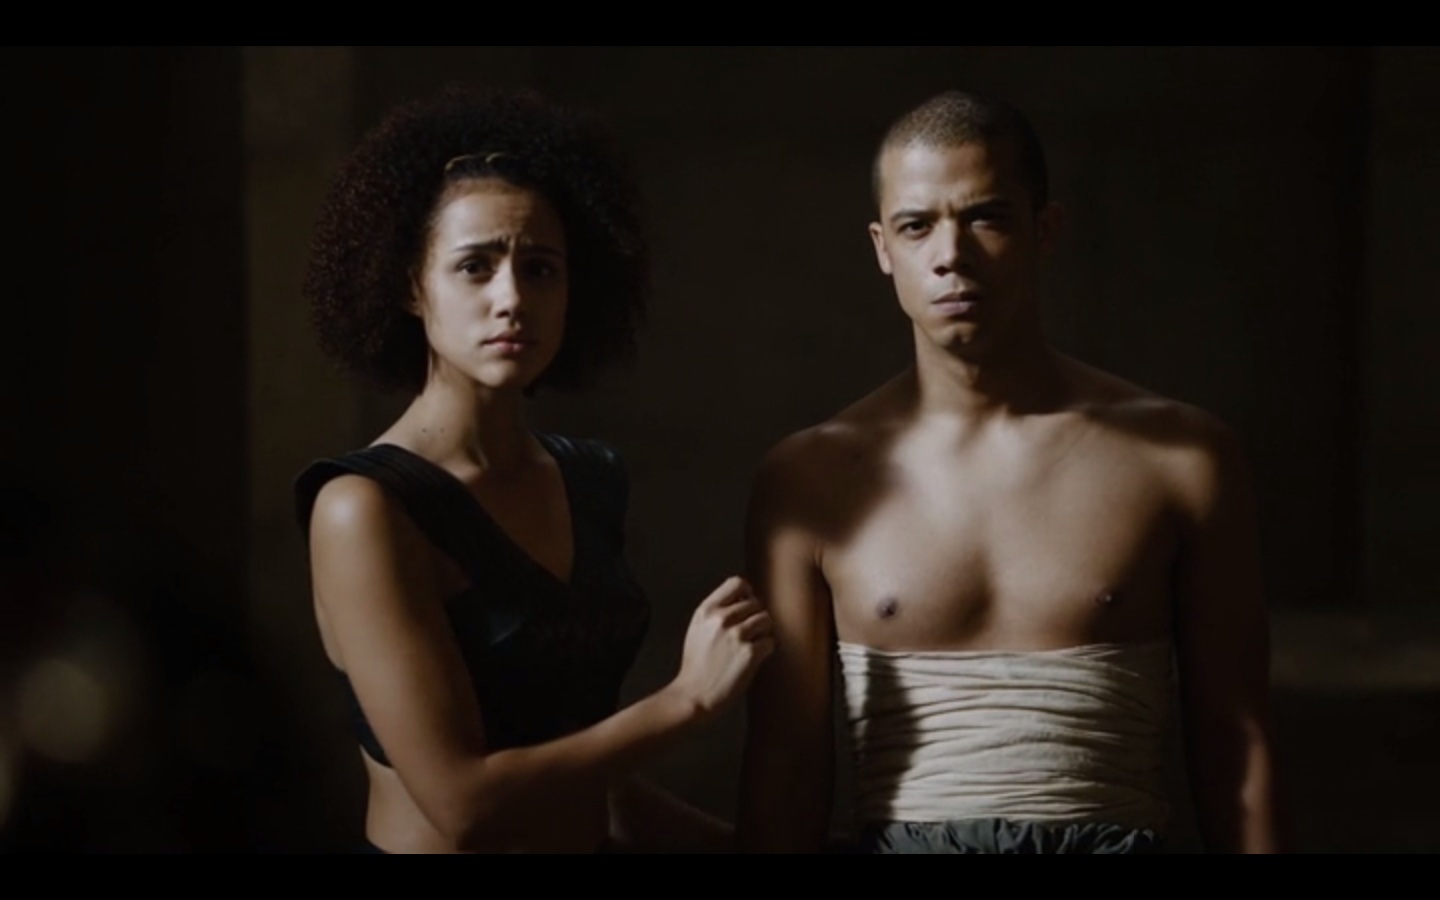 Game of Thrones 5x10 - Jacob Anderson & Naked Extra.